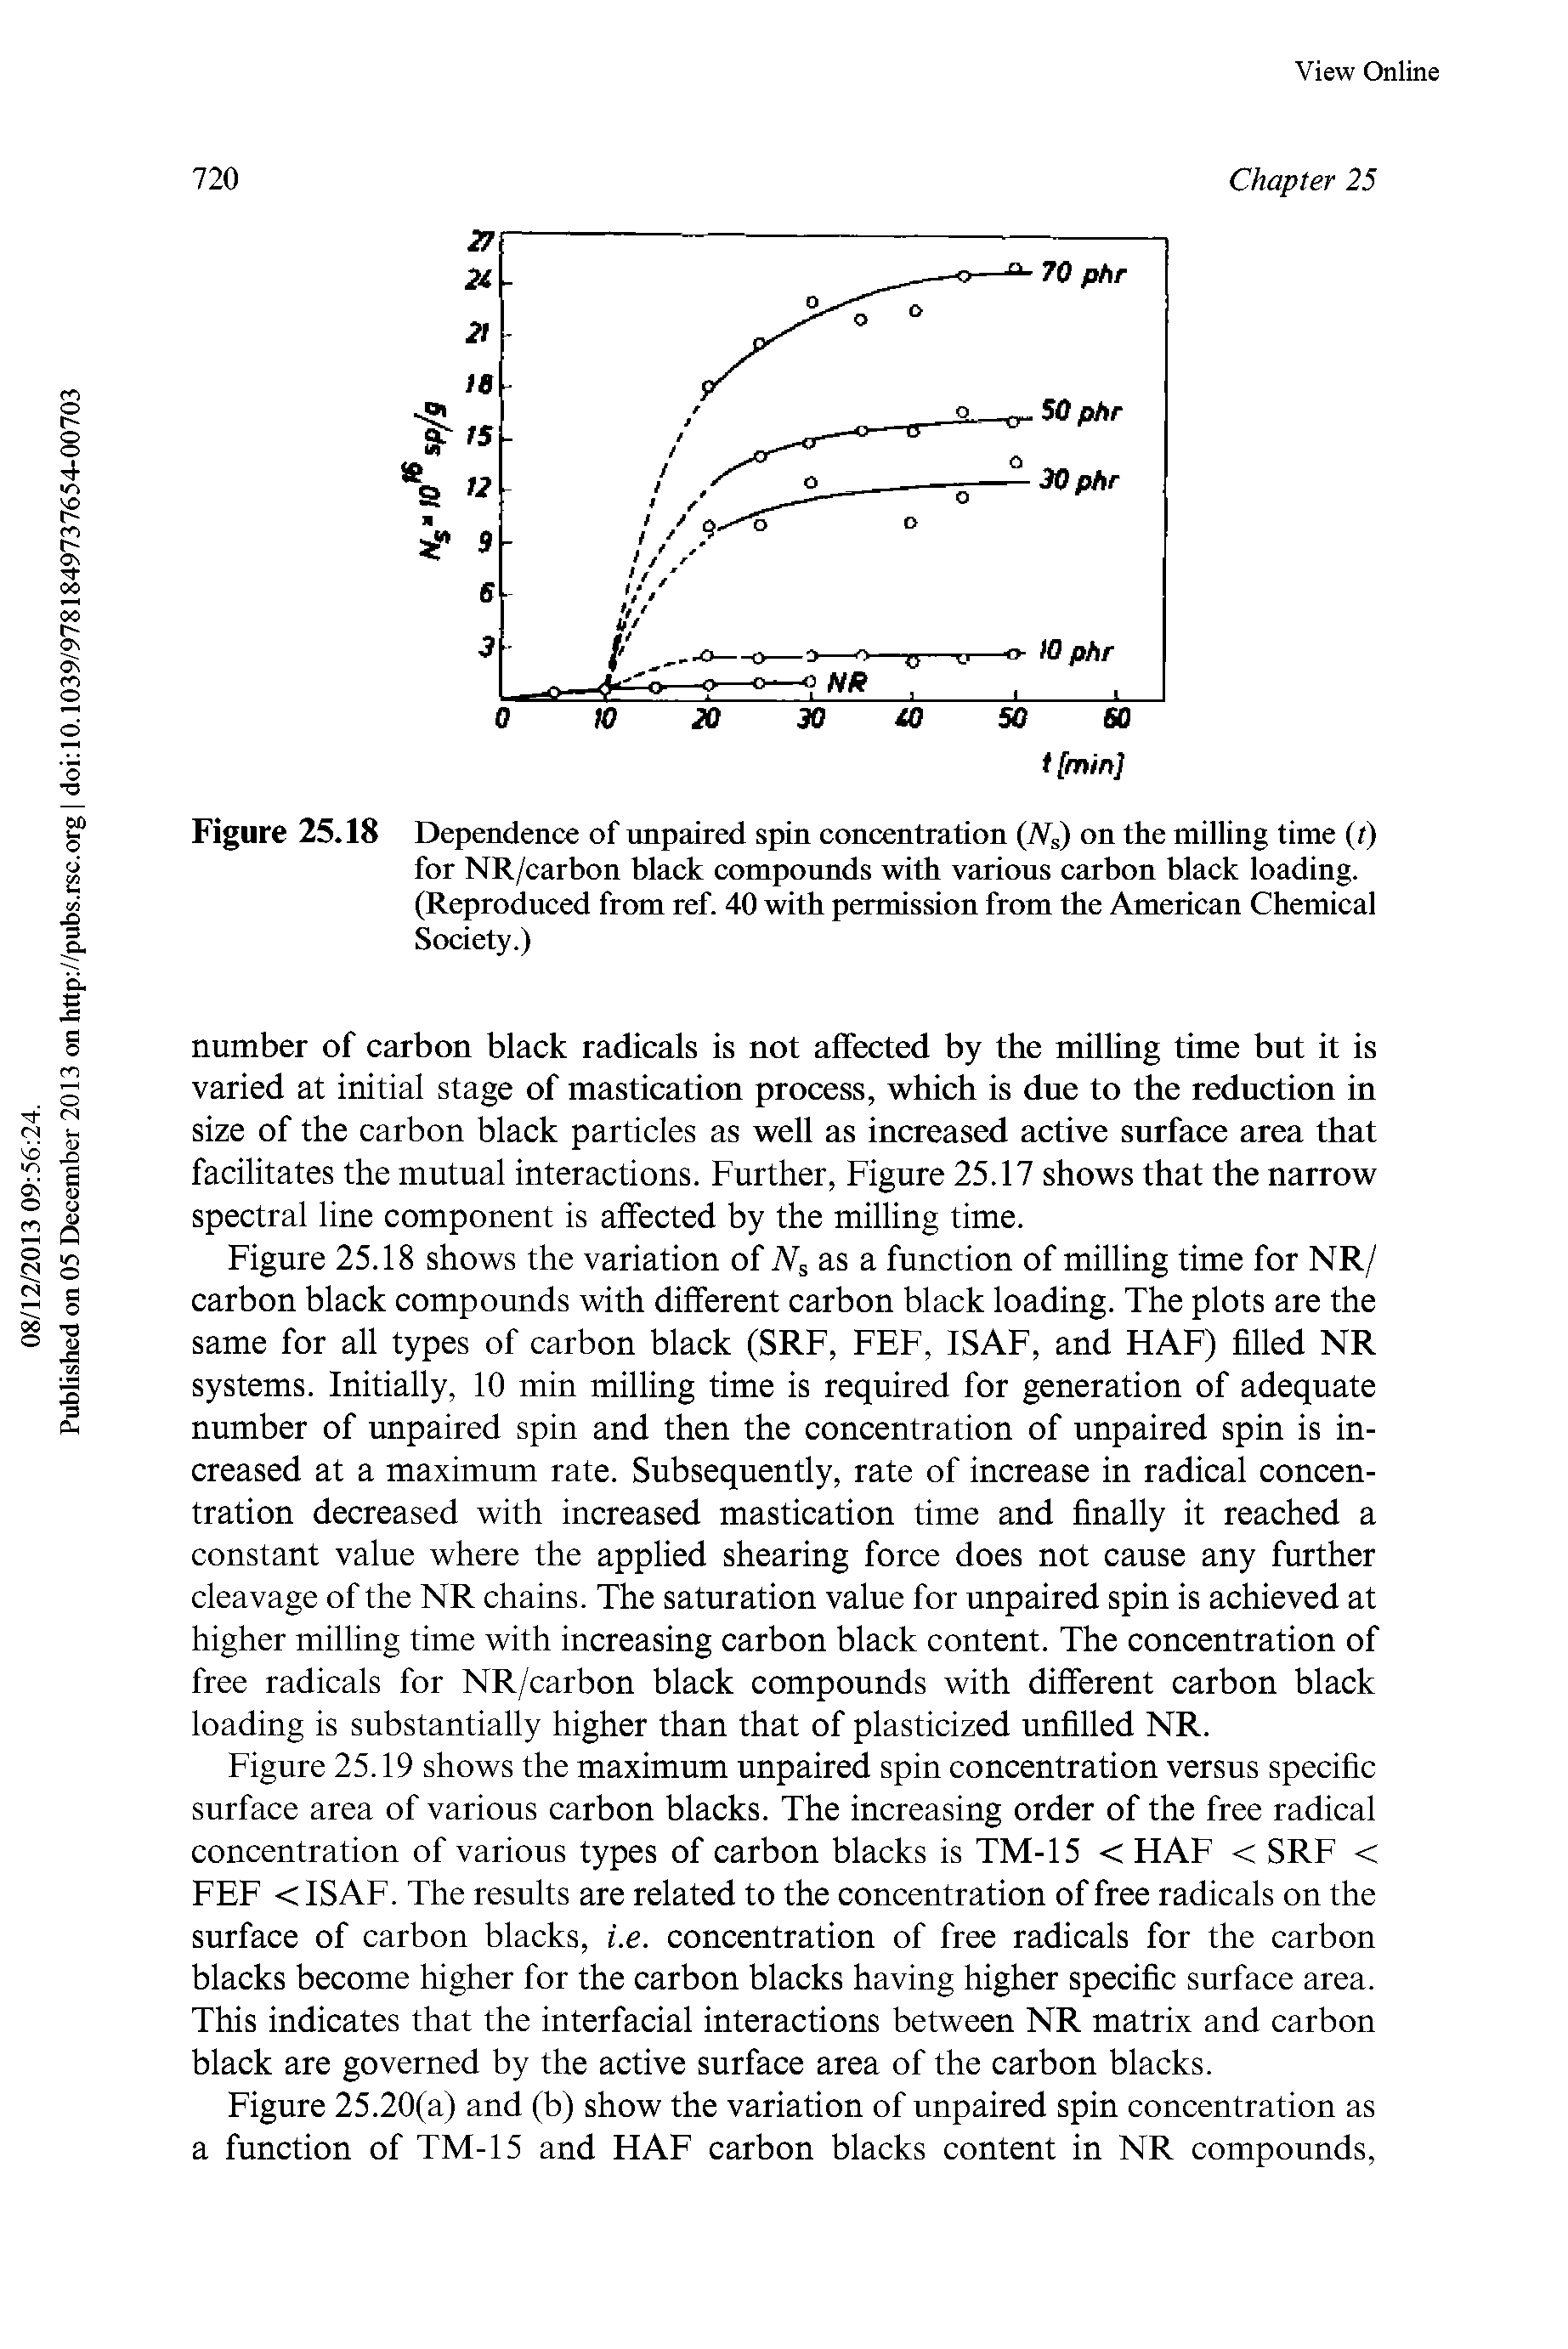 Figure 25.18 Dependence of unpaired spin concentration (TVs) on the milling time (t) for NR/carbon black compounds with various carbon black loading. (Reproduced from ref. 40 with permission from the American Chemical Society.)...